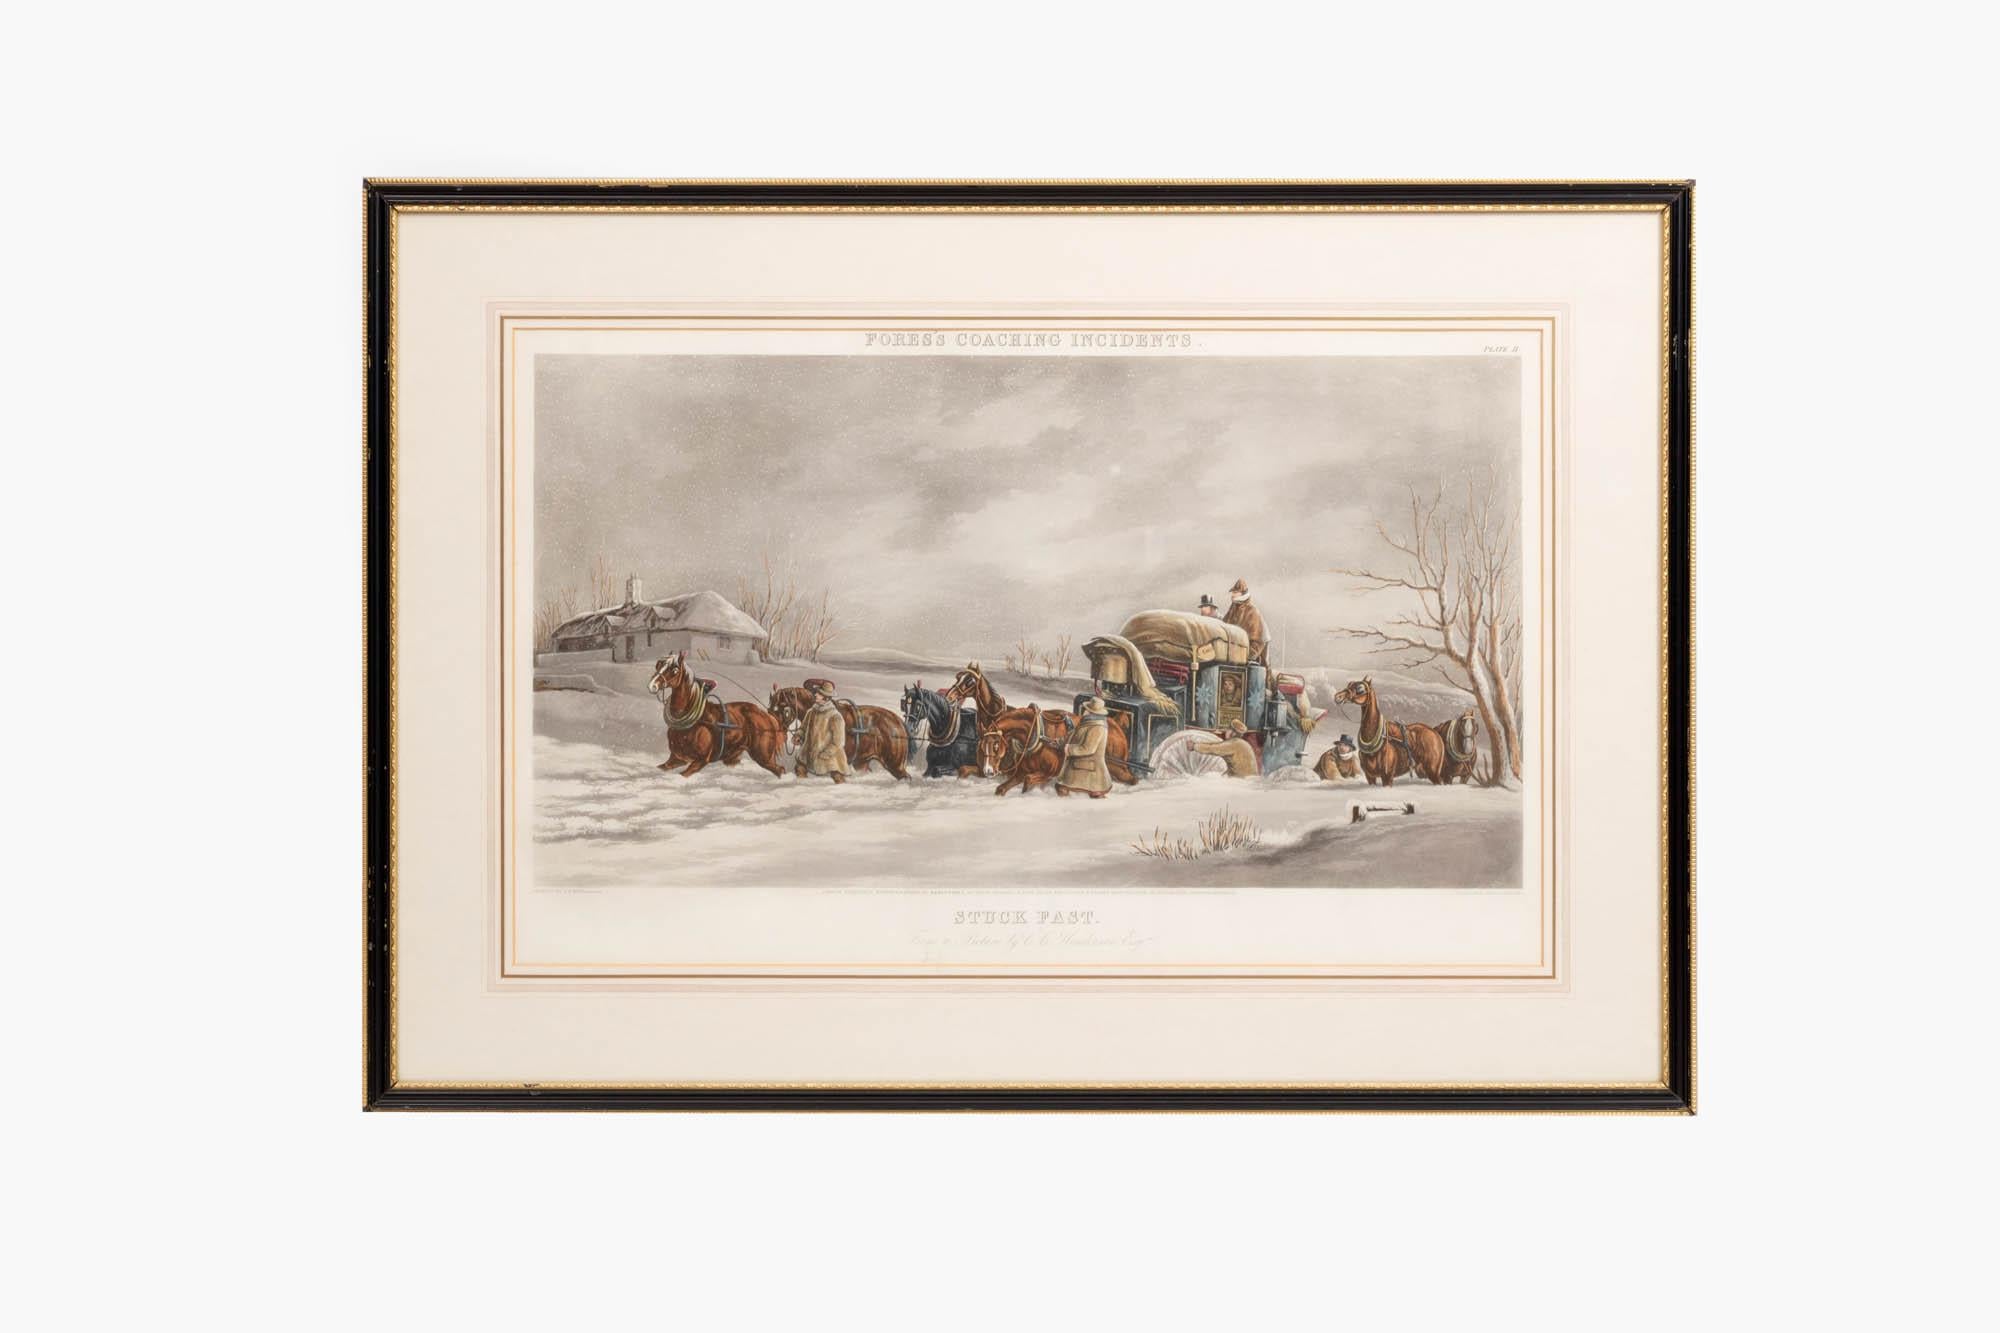 Pair 19th century hand-coloured aquatint etchings depicting scenes from the “Fores’s Coaching Incidents” series. Mounted behind glass in gilt and ebonized frames, this pair were painted by Charles Cooper Henderson, London, 1843. The engraving of